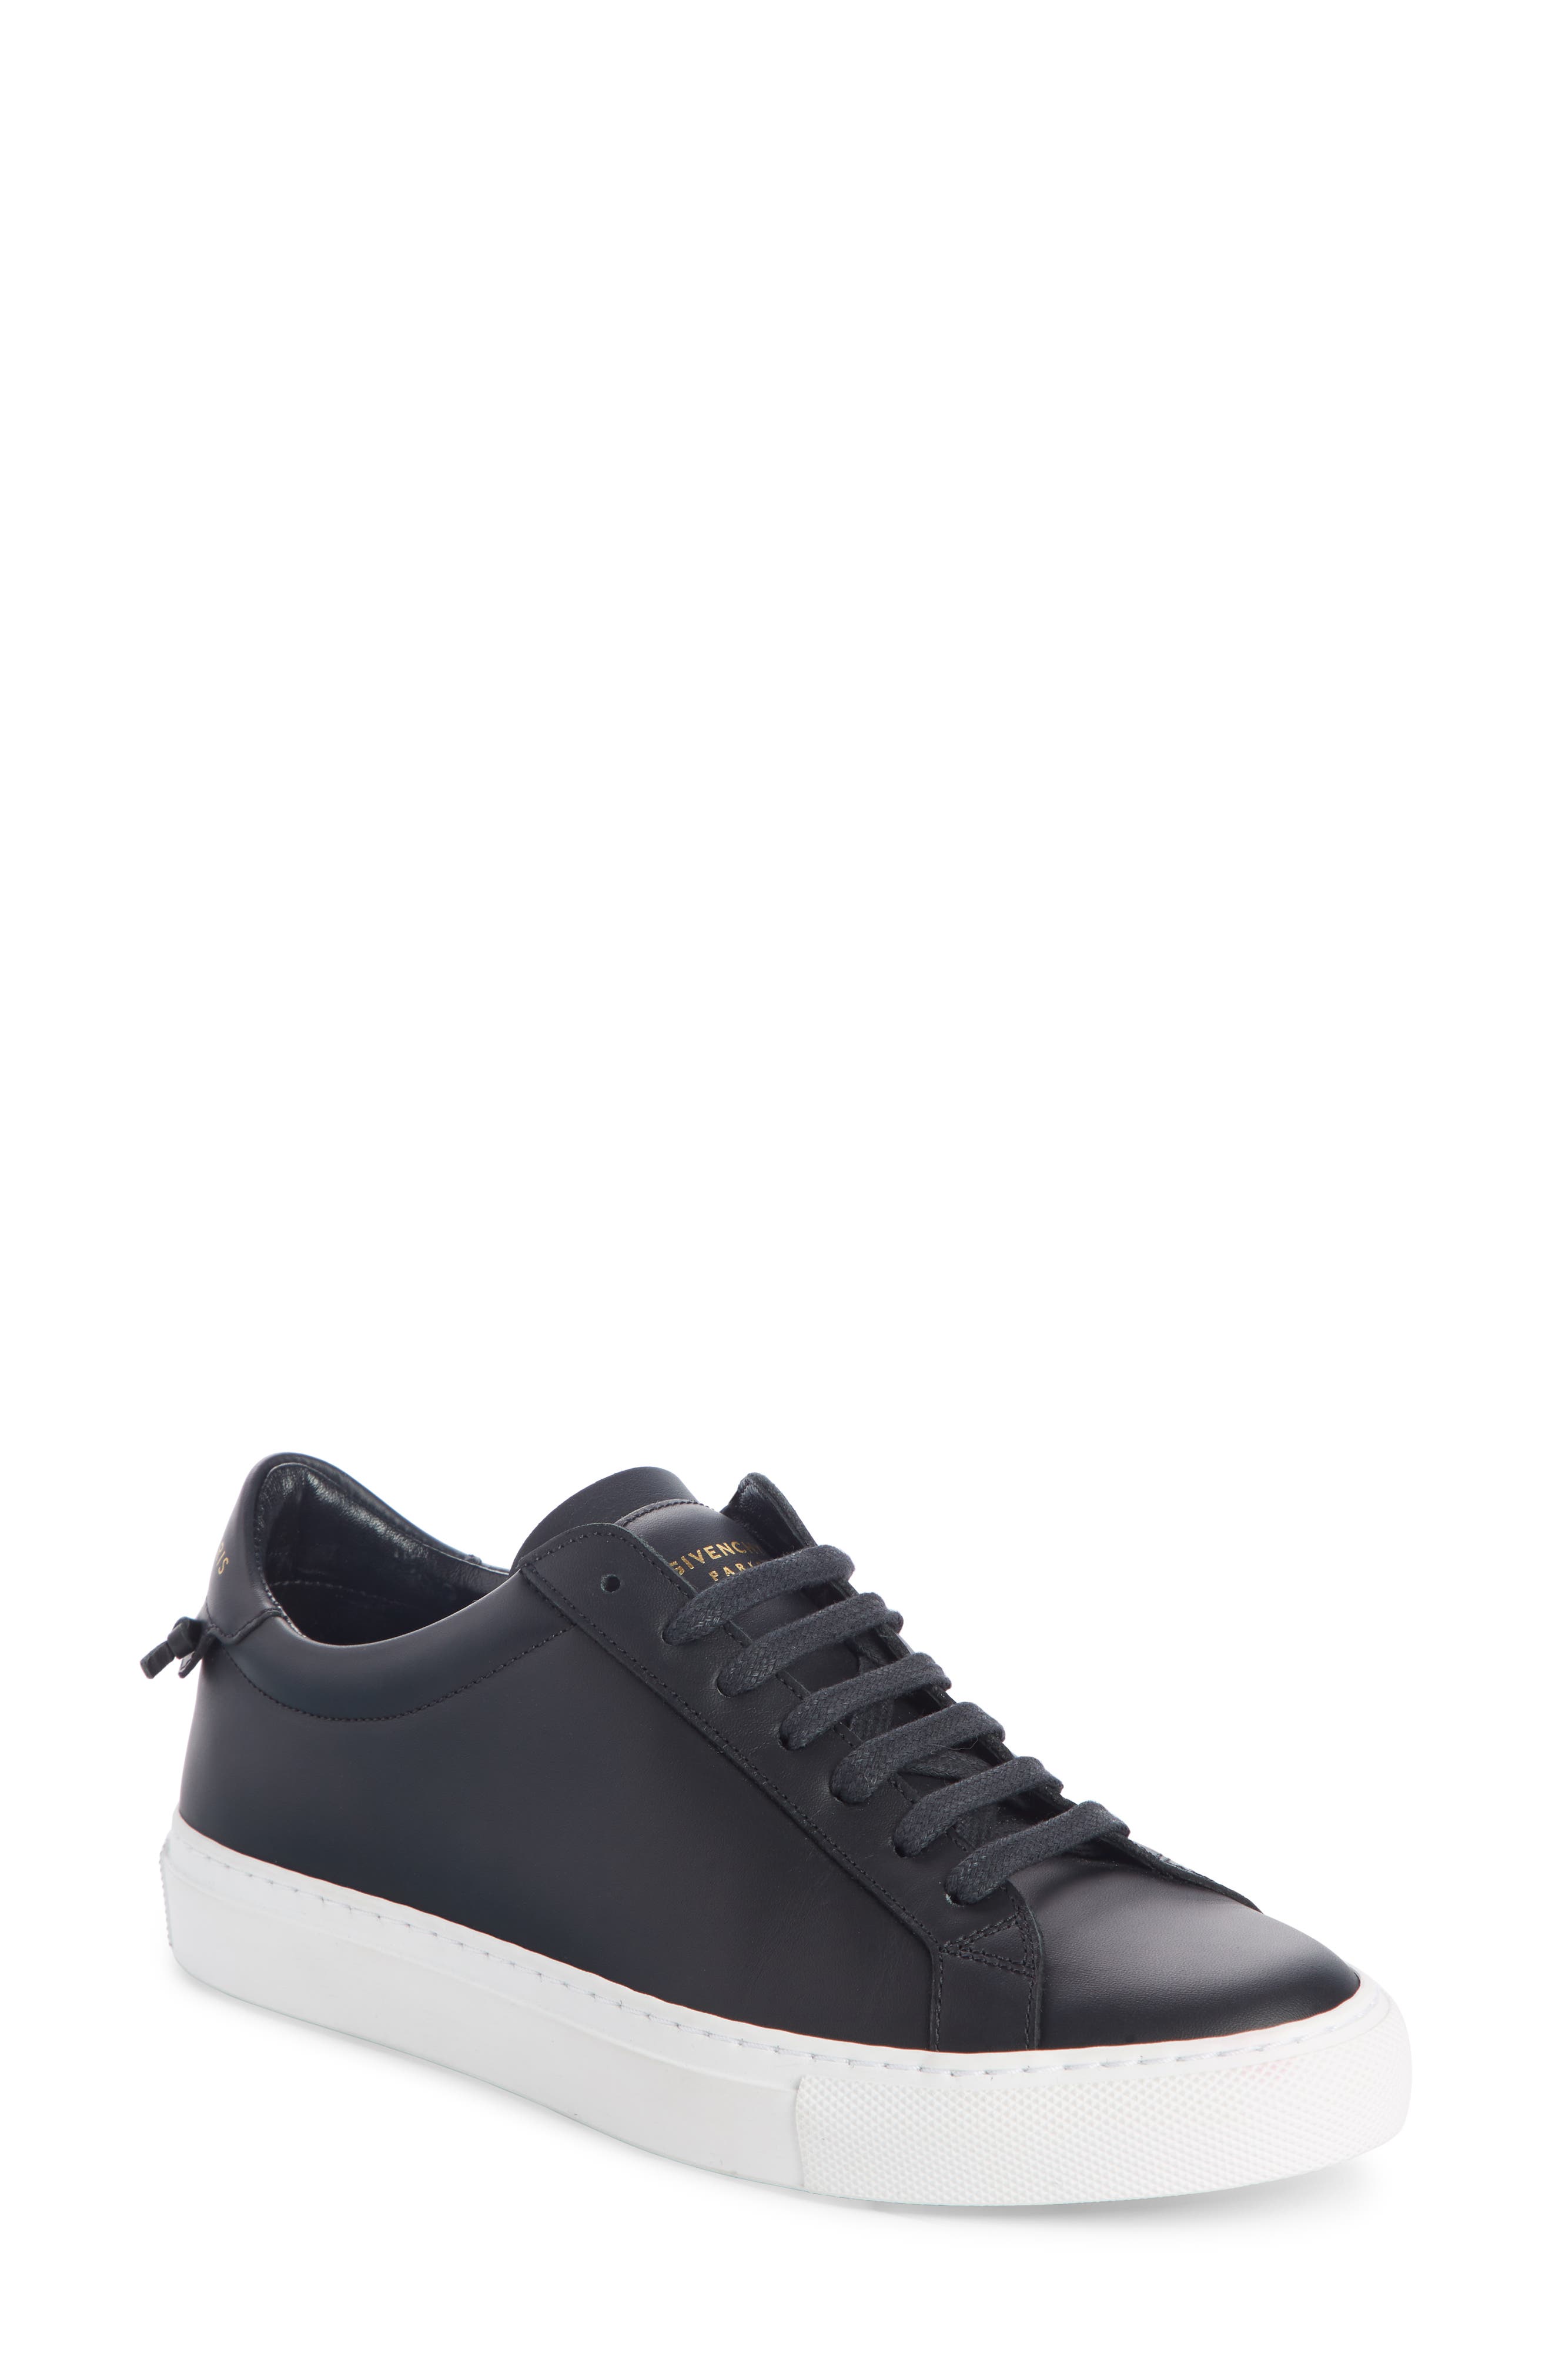 givenchy sneakers black and white